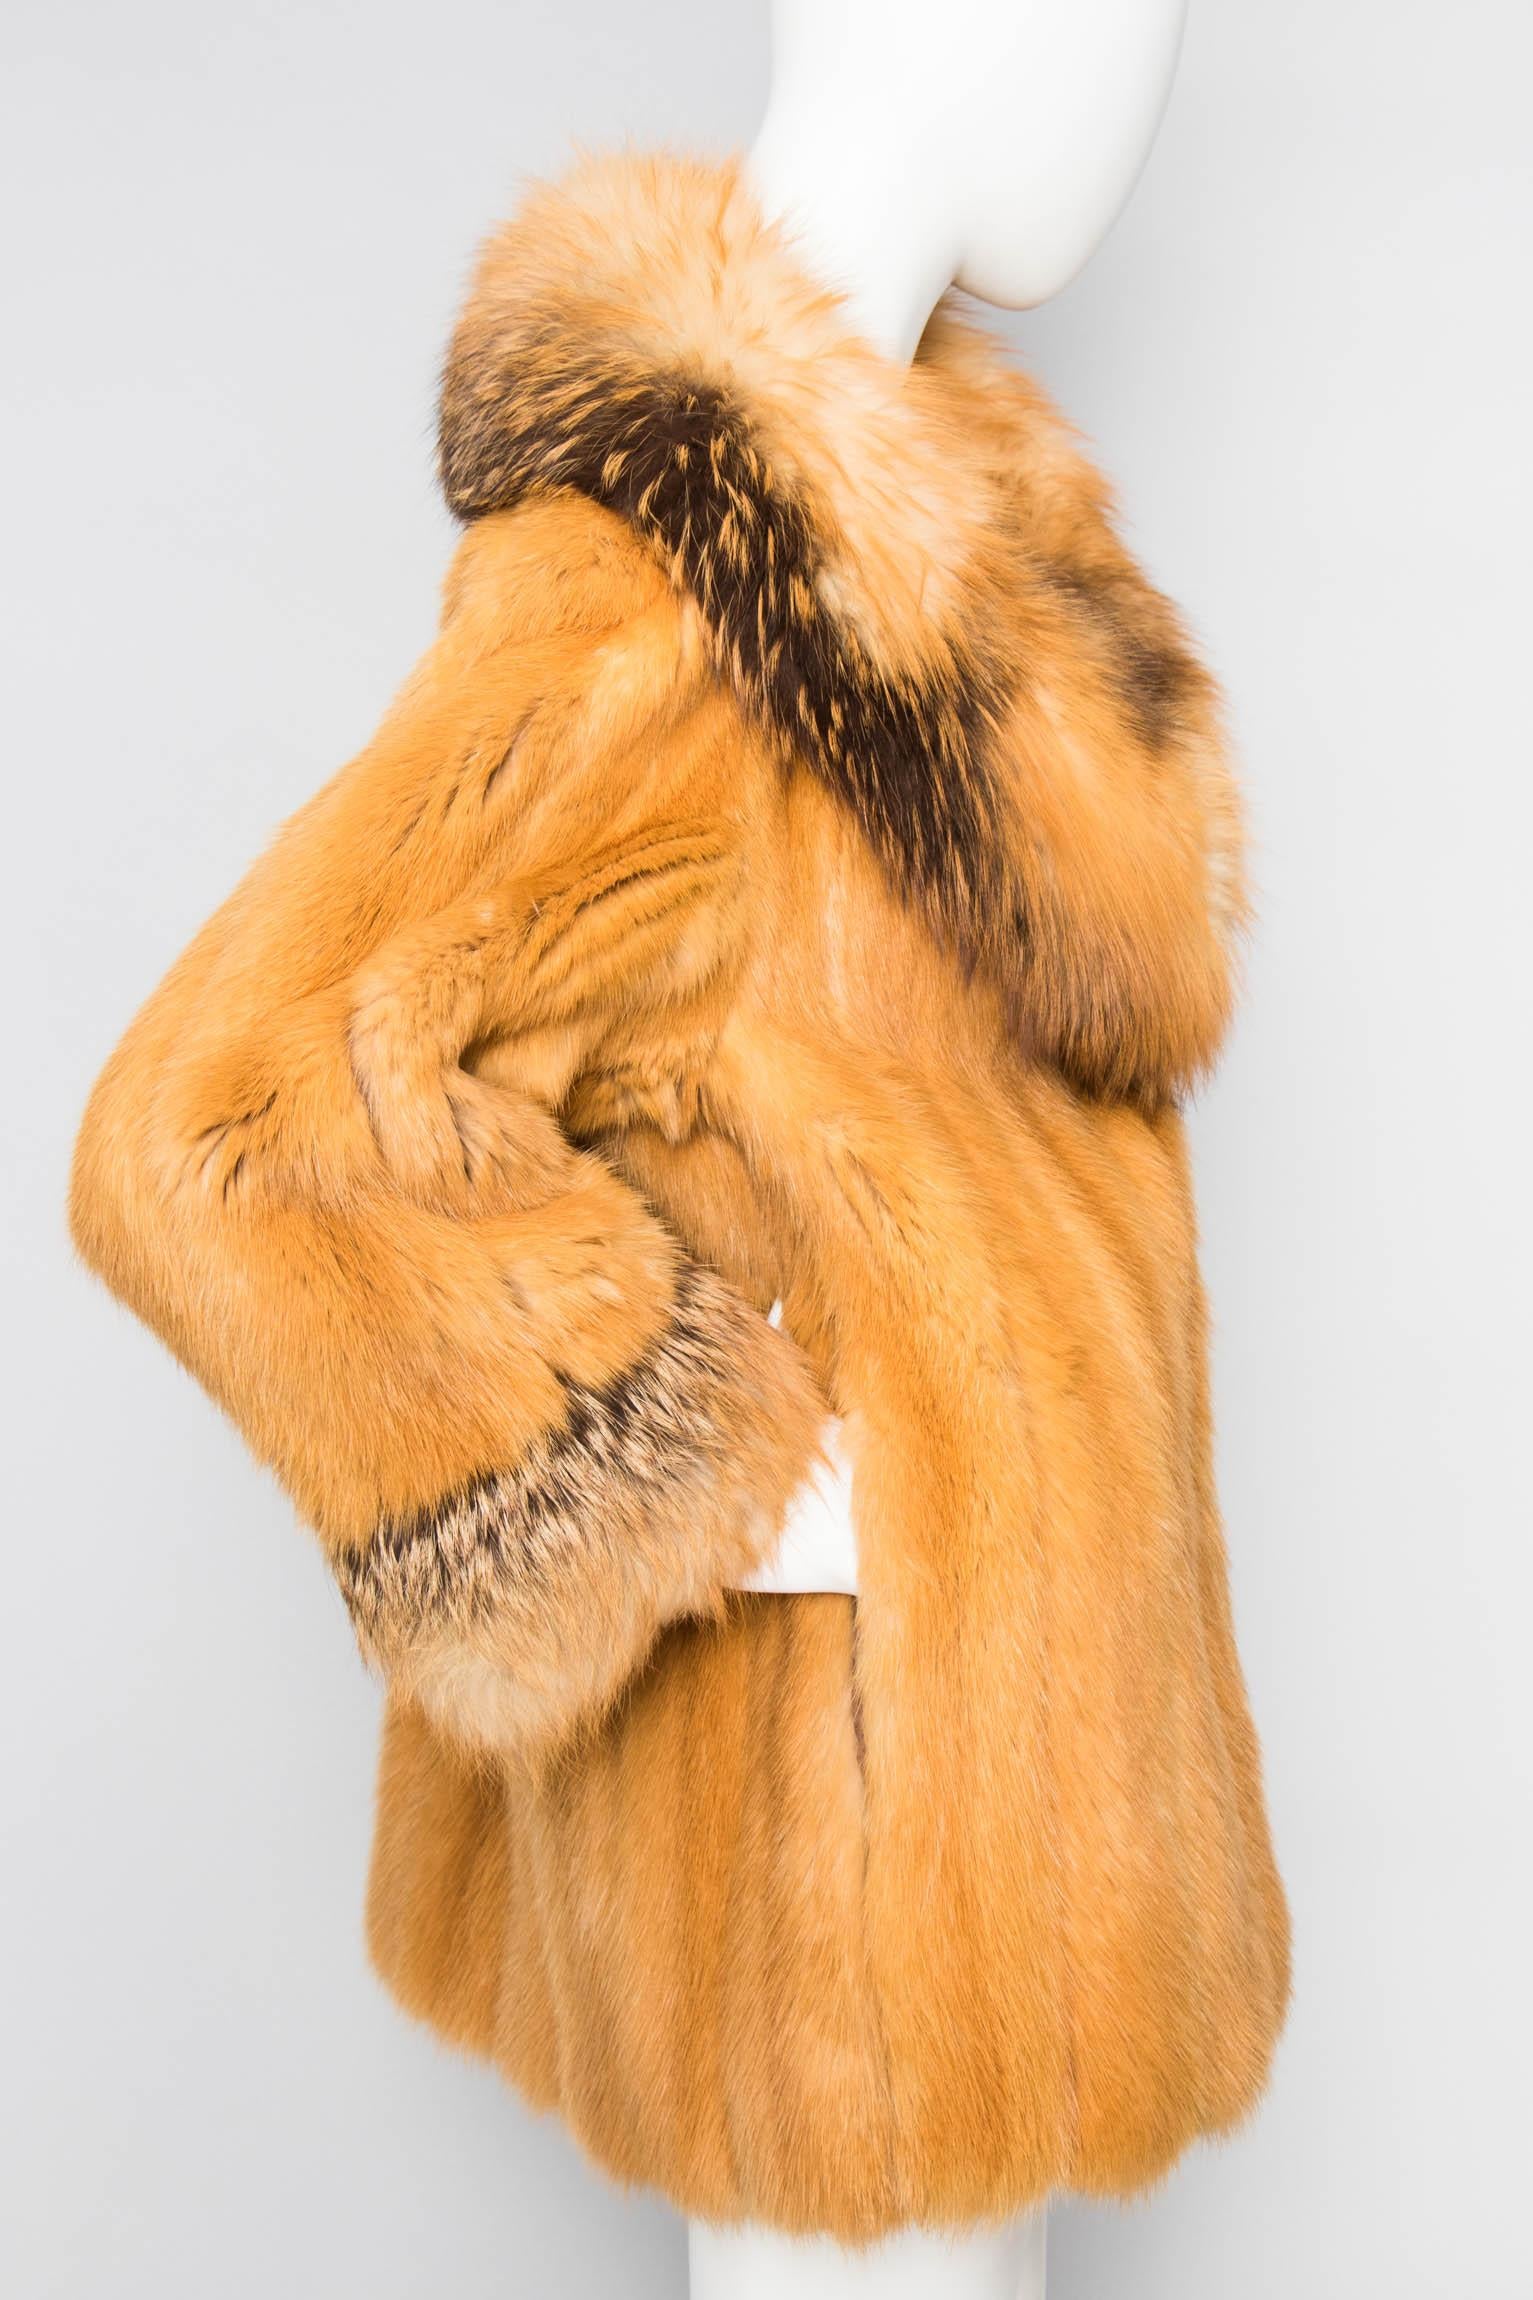 An incredible 1980s Birger Christensen Canadian fox fur coat with an extravagant collar and cuff trim. The jacket closes in the front and has side pockets. 

The size of the coat corresponds to a modern size small, but please see the measurements